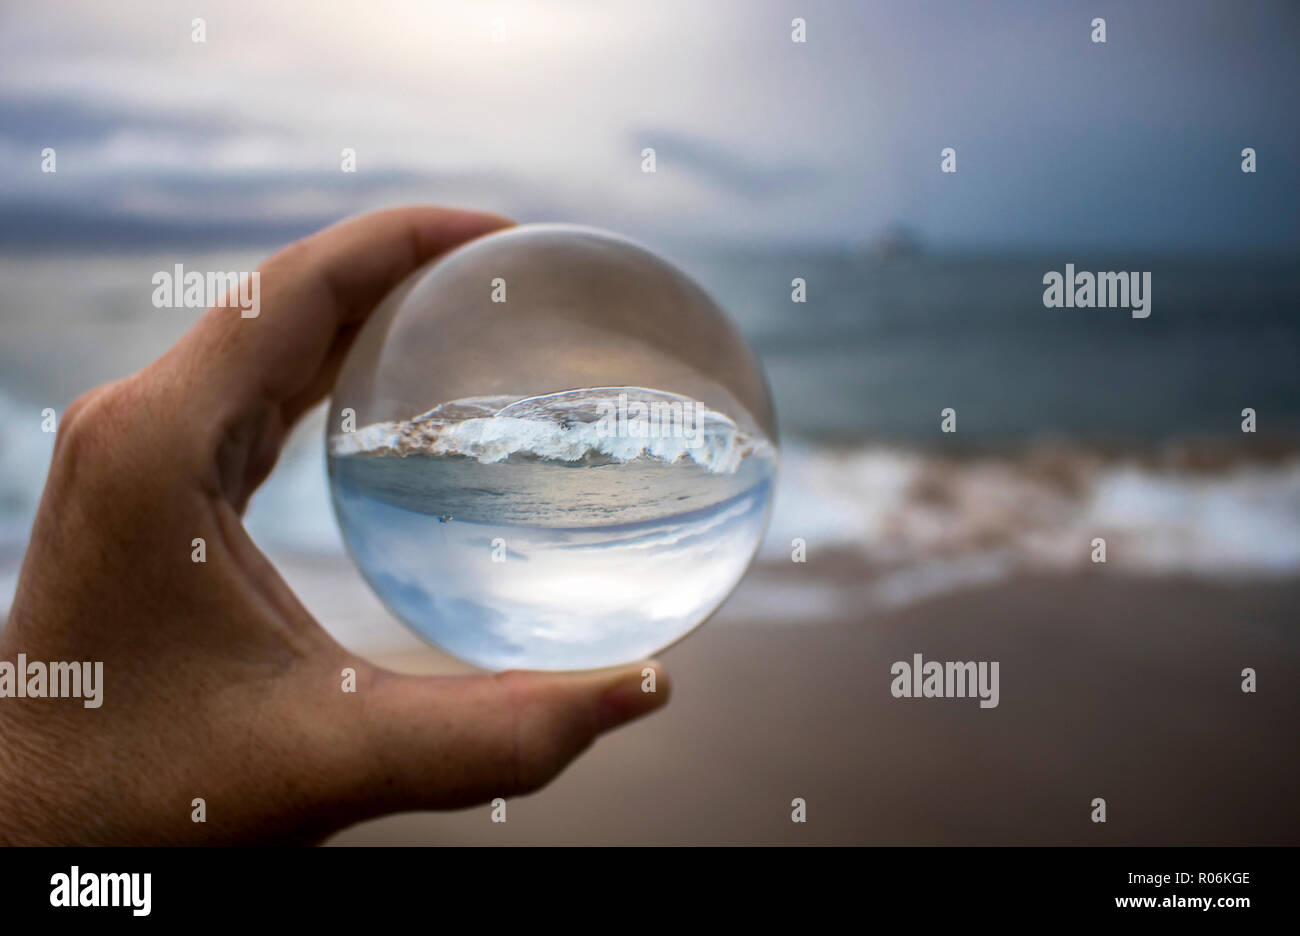 Stormy surf breaking on sand captured in glass ball reflection held in fingertips Stock Photo